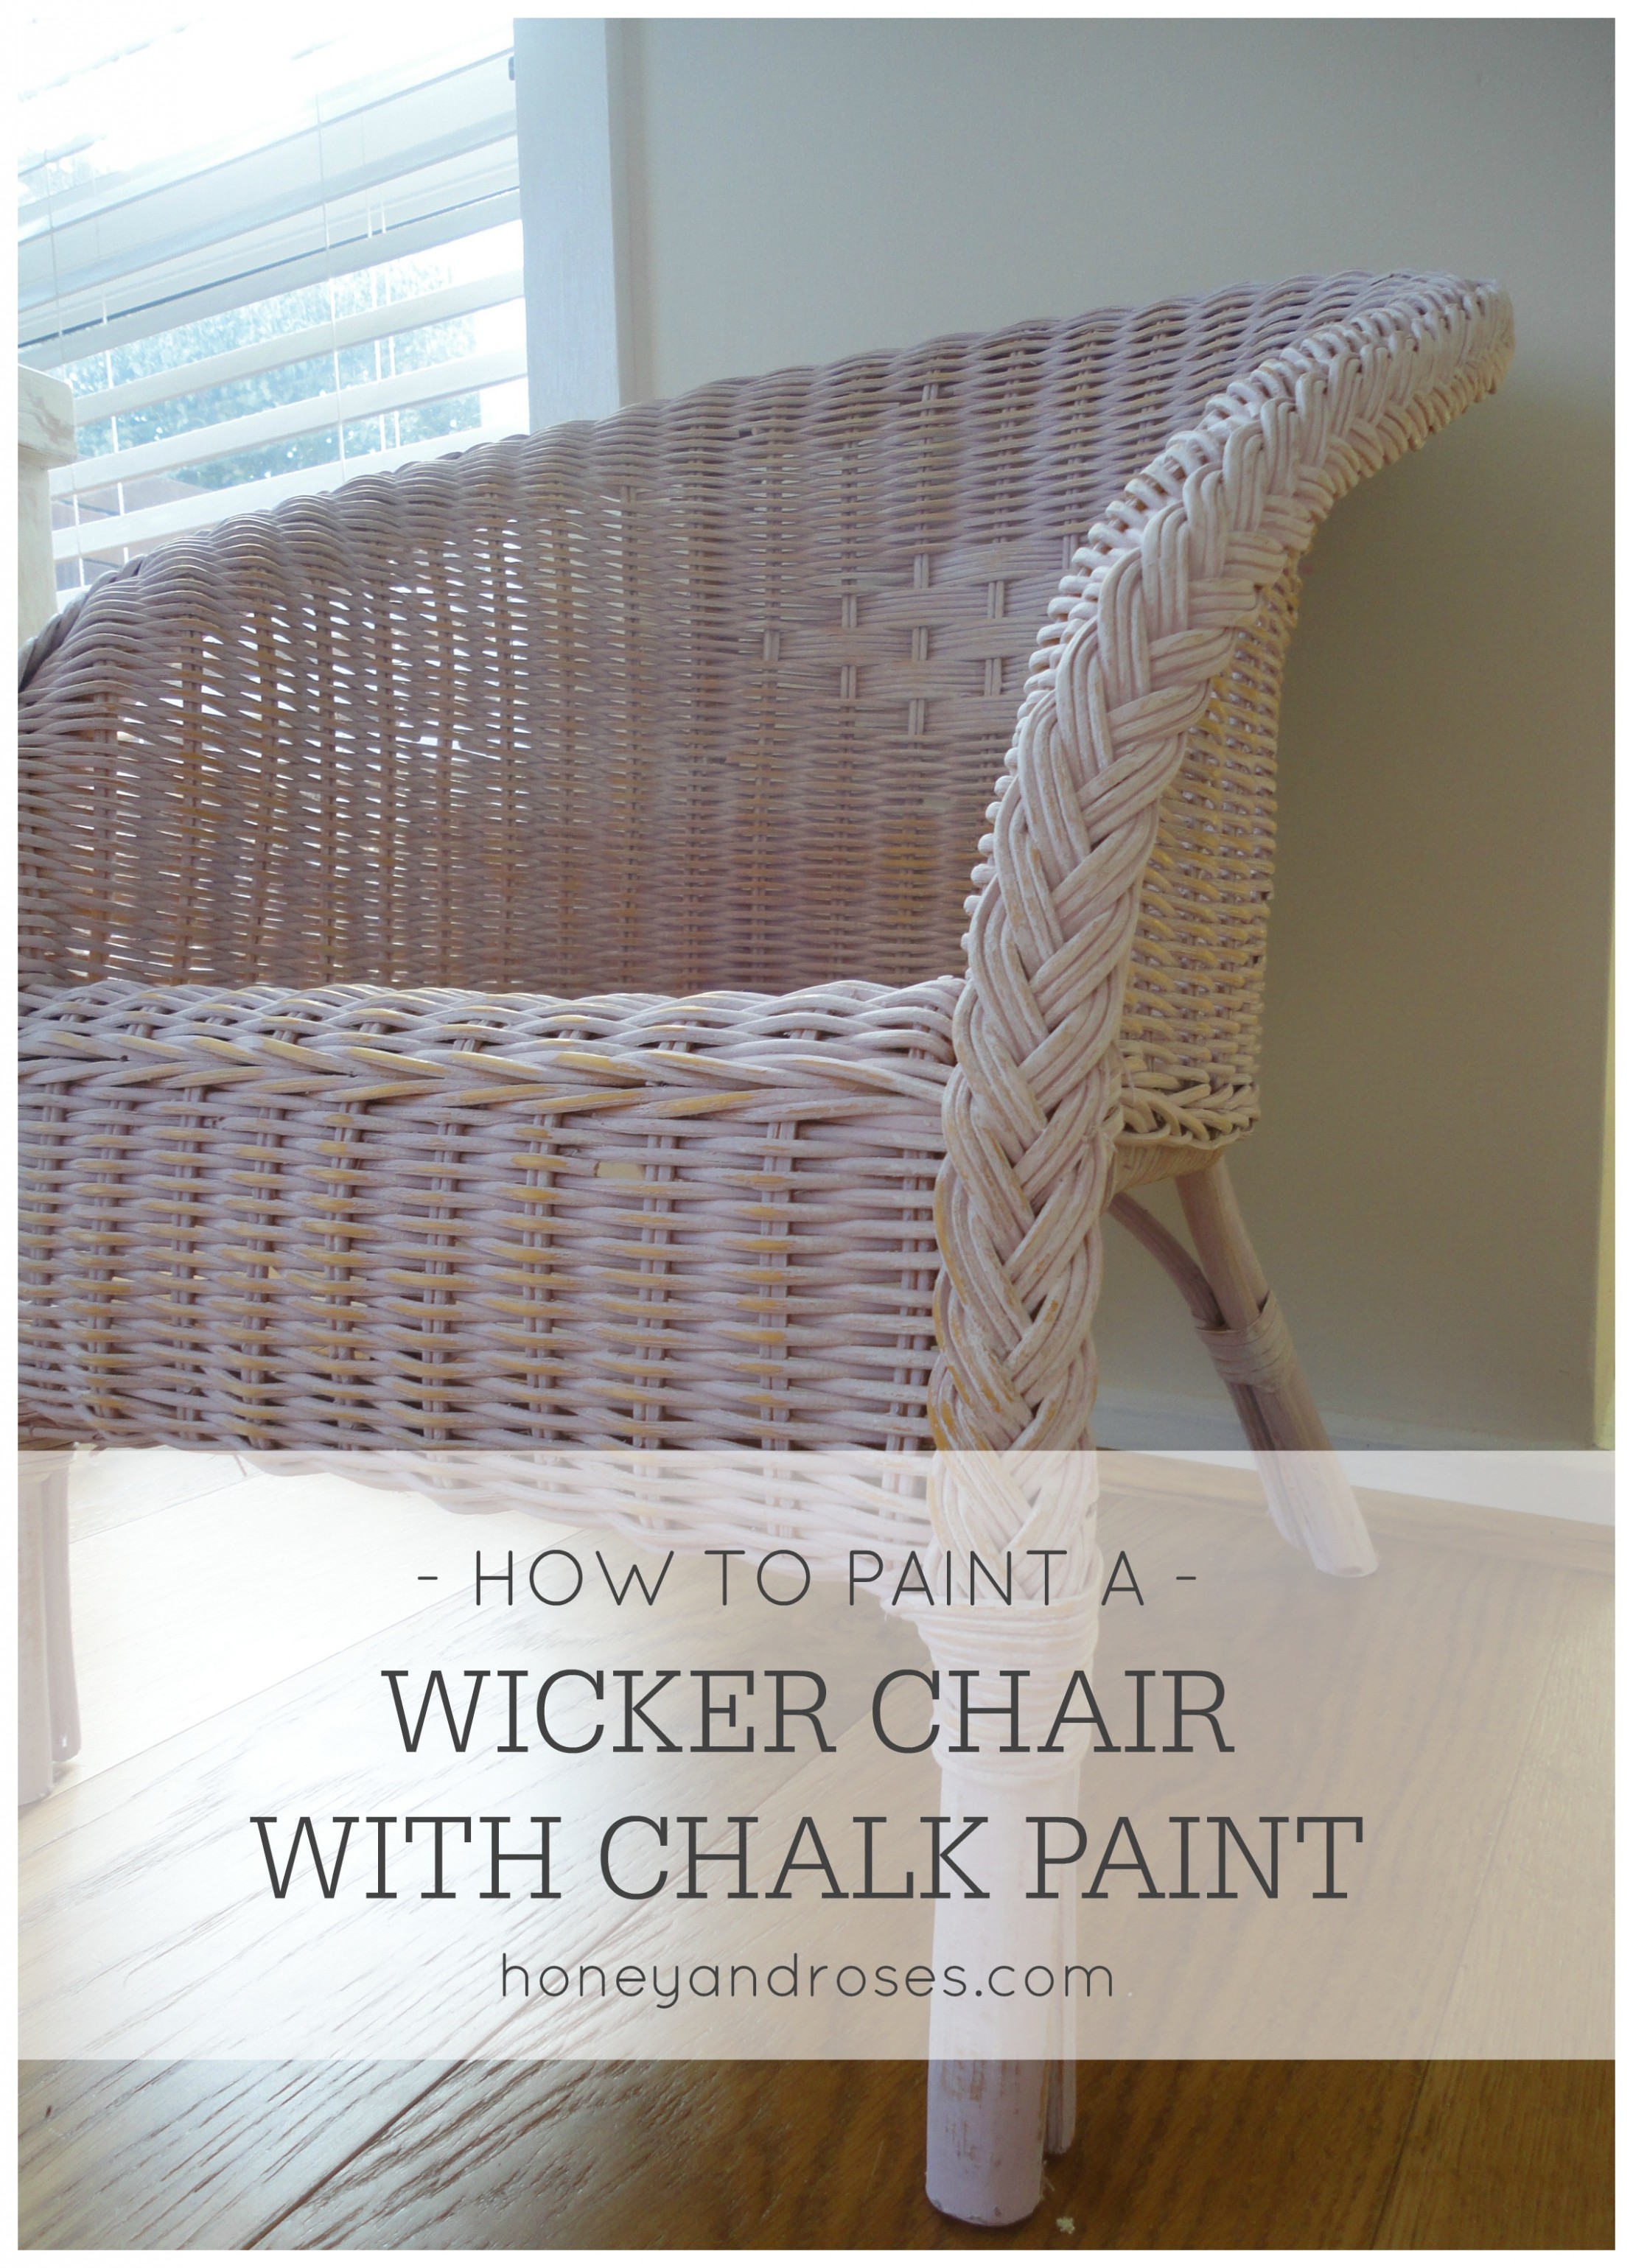 How To Paint A Wicker Chair With Chalk Paint | Honey & Roses Where To Buy Annie Sloan Chalk Paint In Melbourne Australia